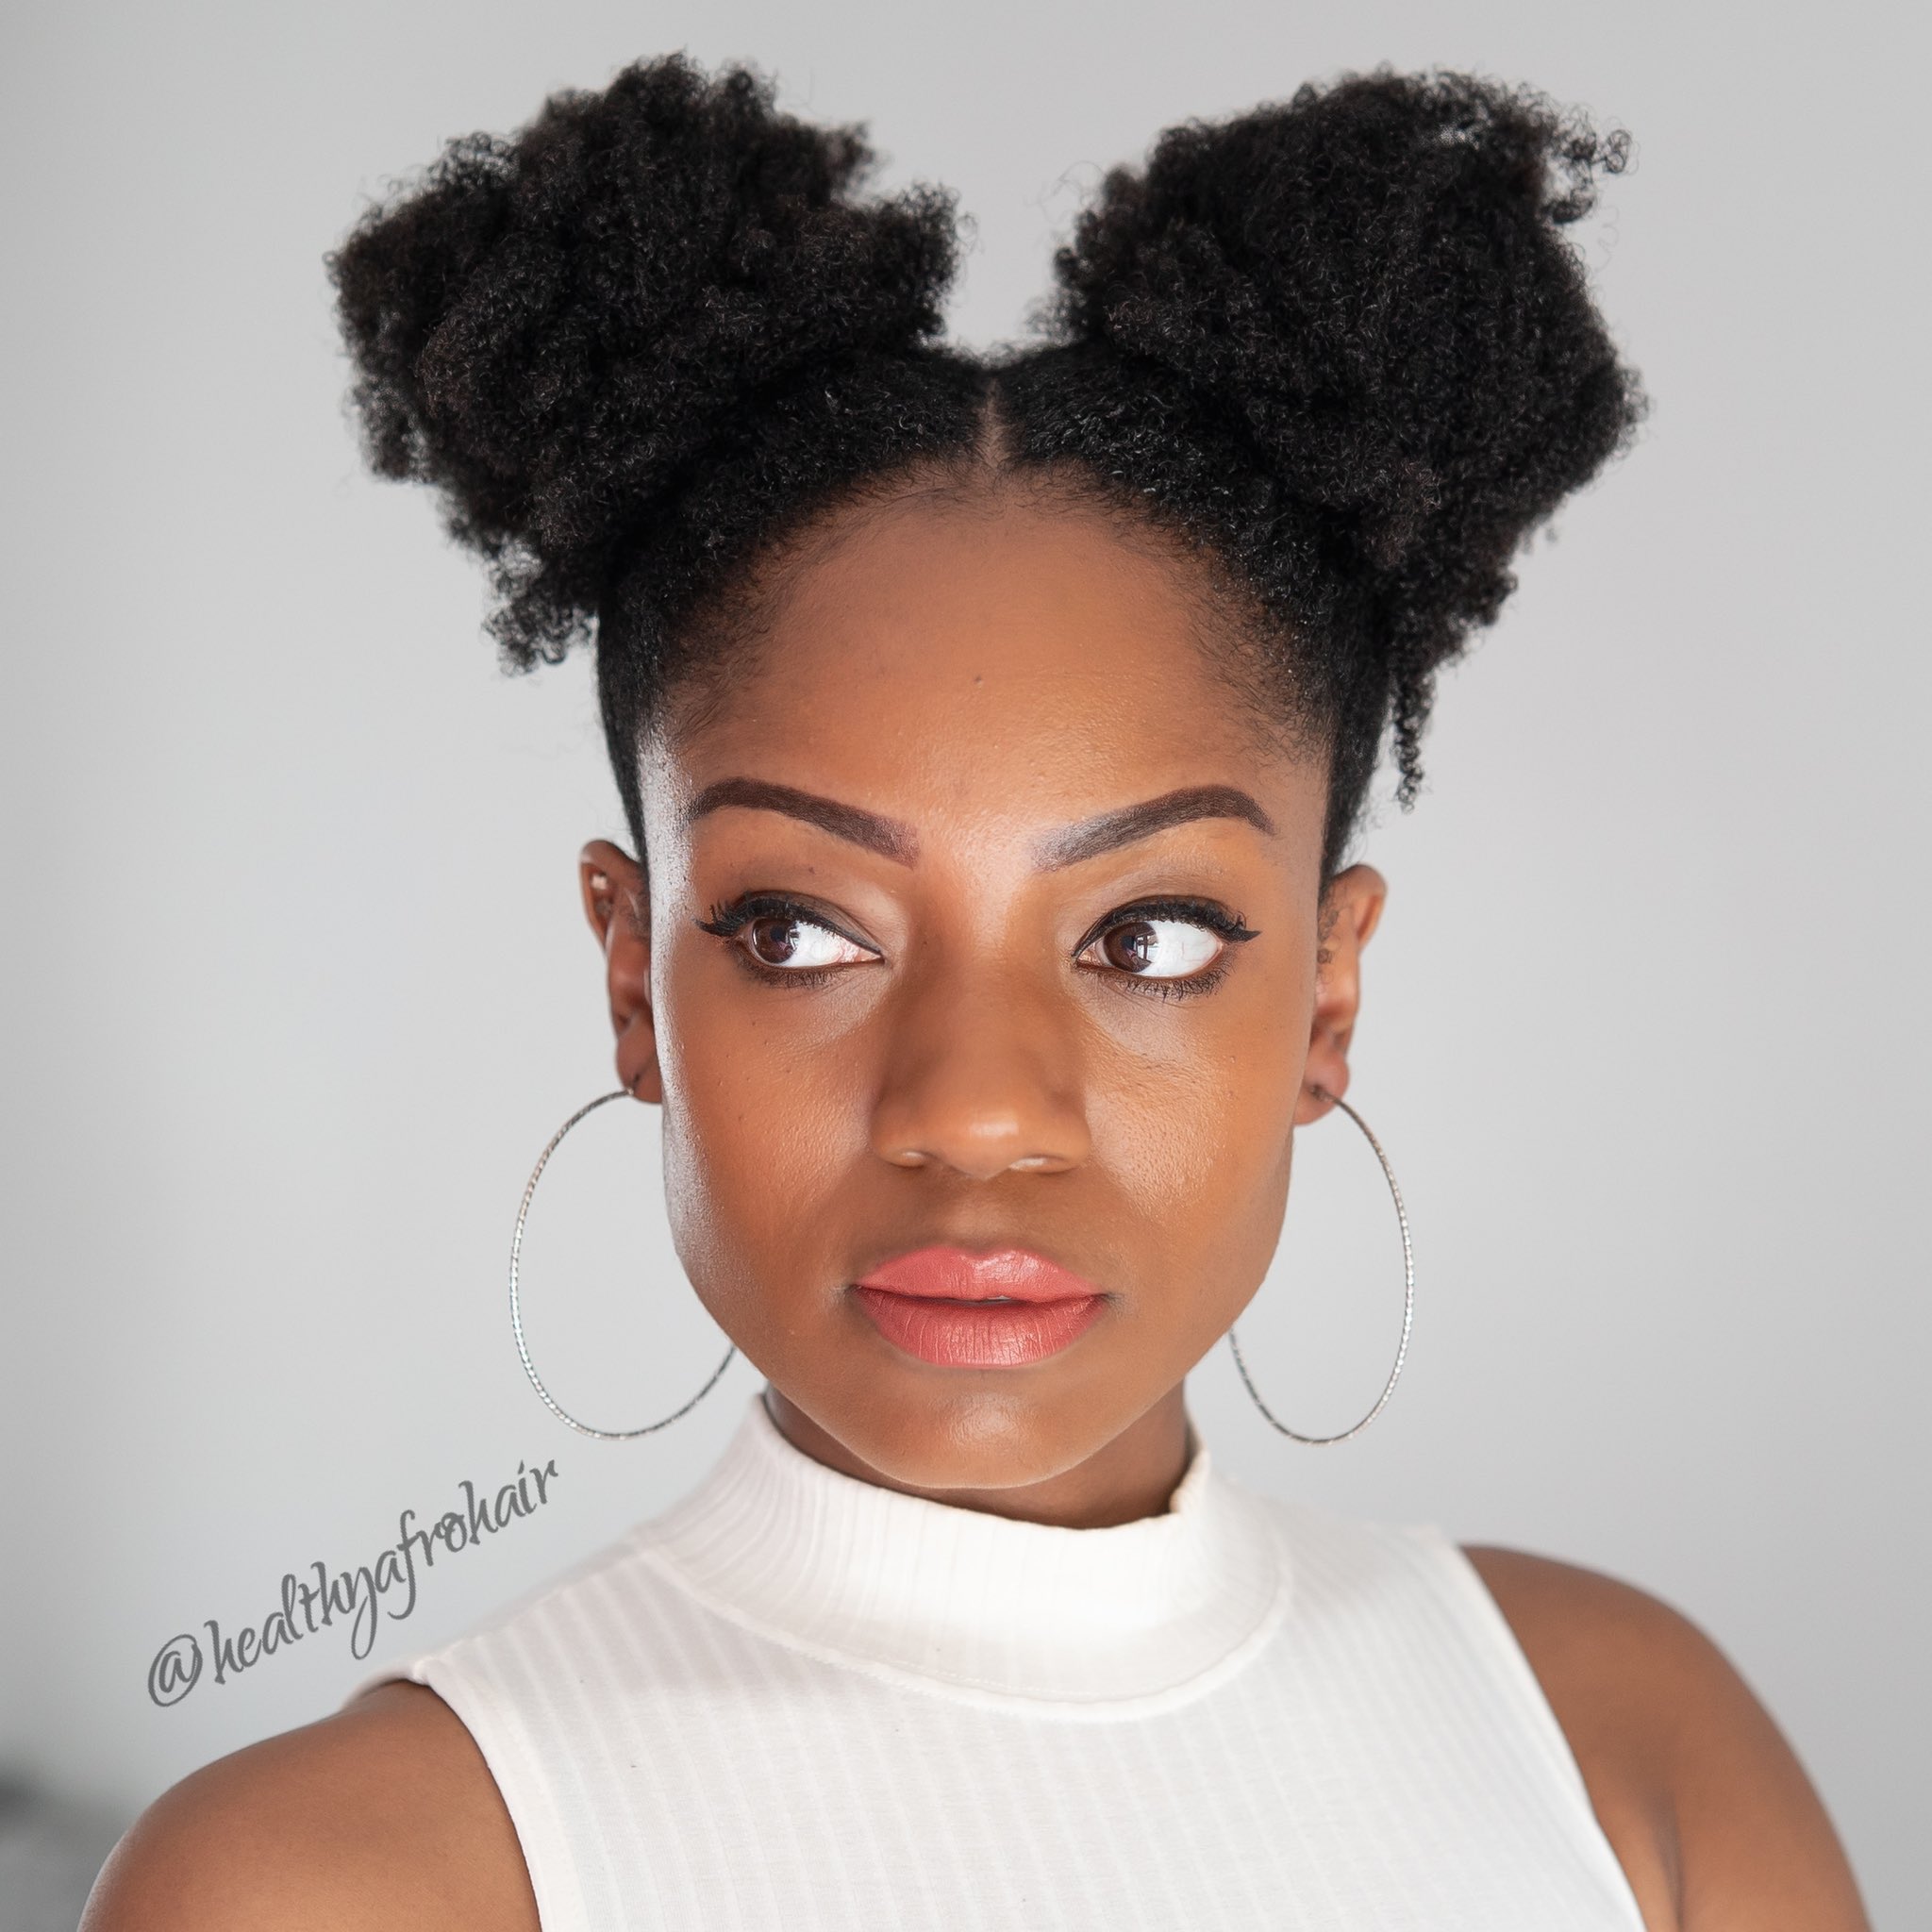 Hairstyle idea: bubble braids + space buns🪐 | Gallery posted by  itsnicandrea | Lemon8